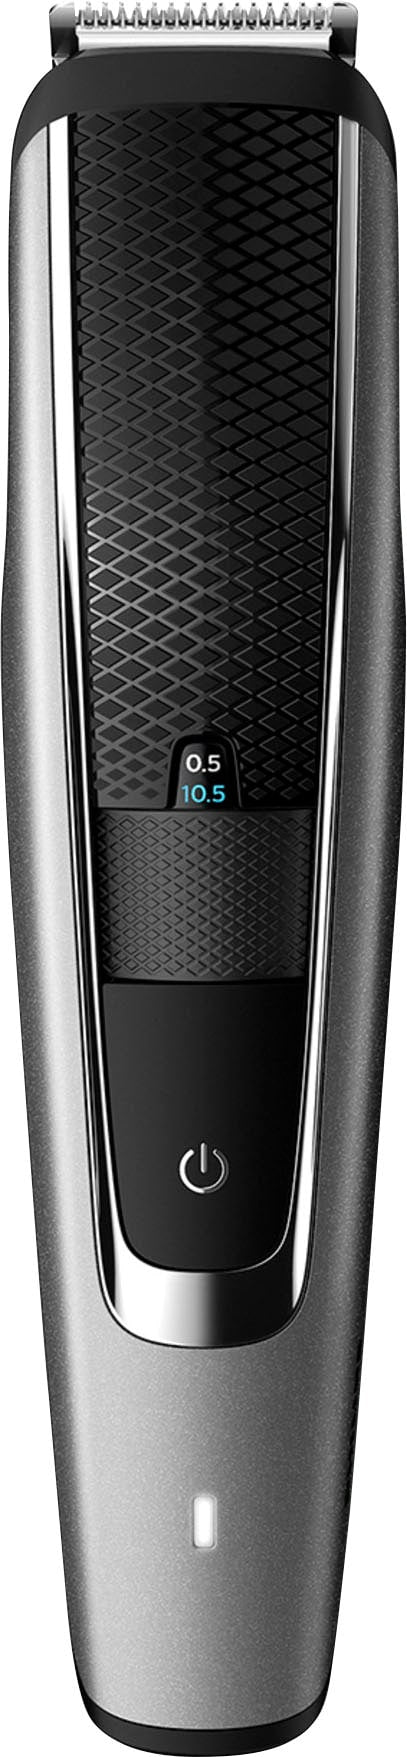 Philips Norelco Beard Trimmer and Hair Clipper Series 5000, BT5502/40 - Black And Silver_4